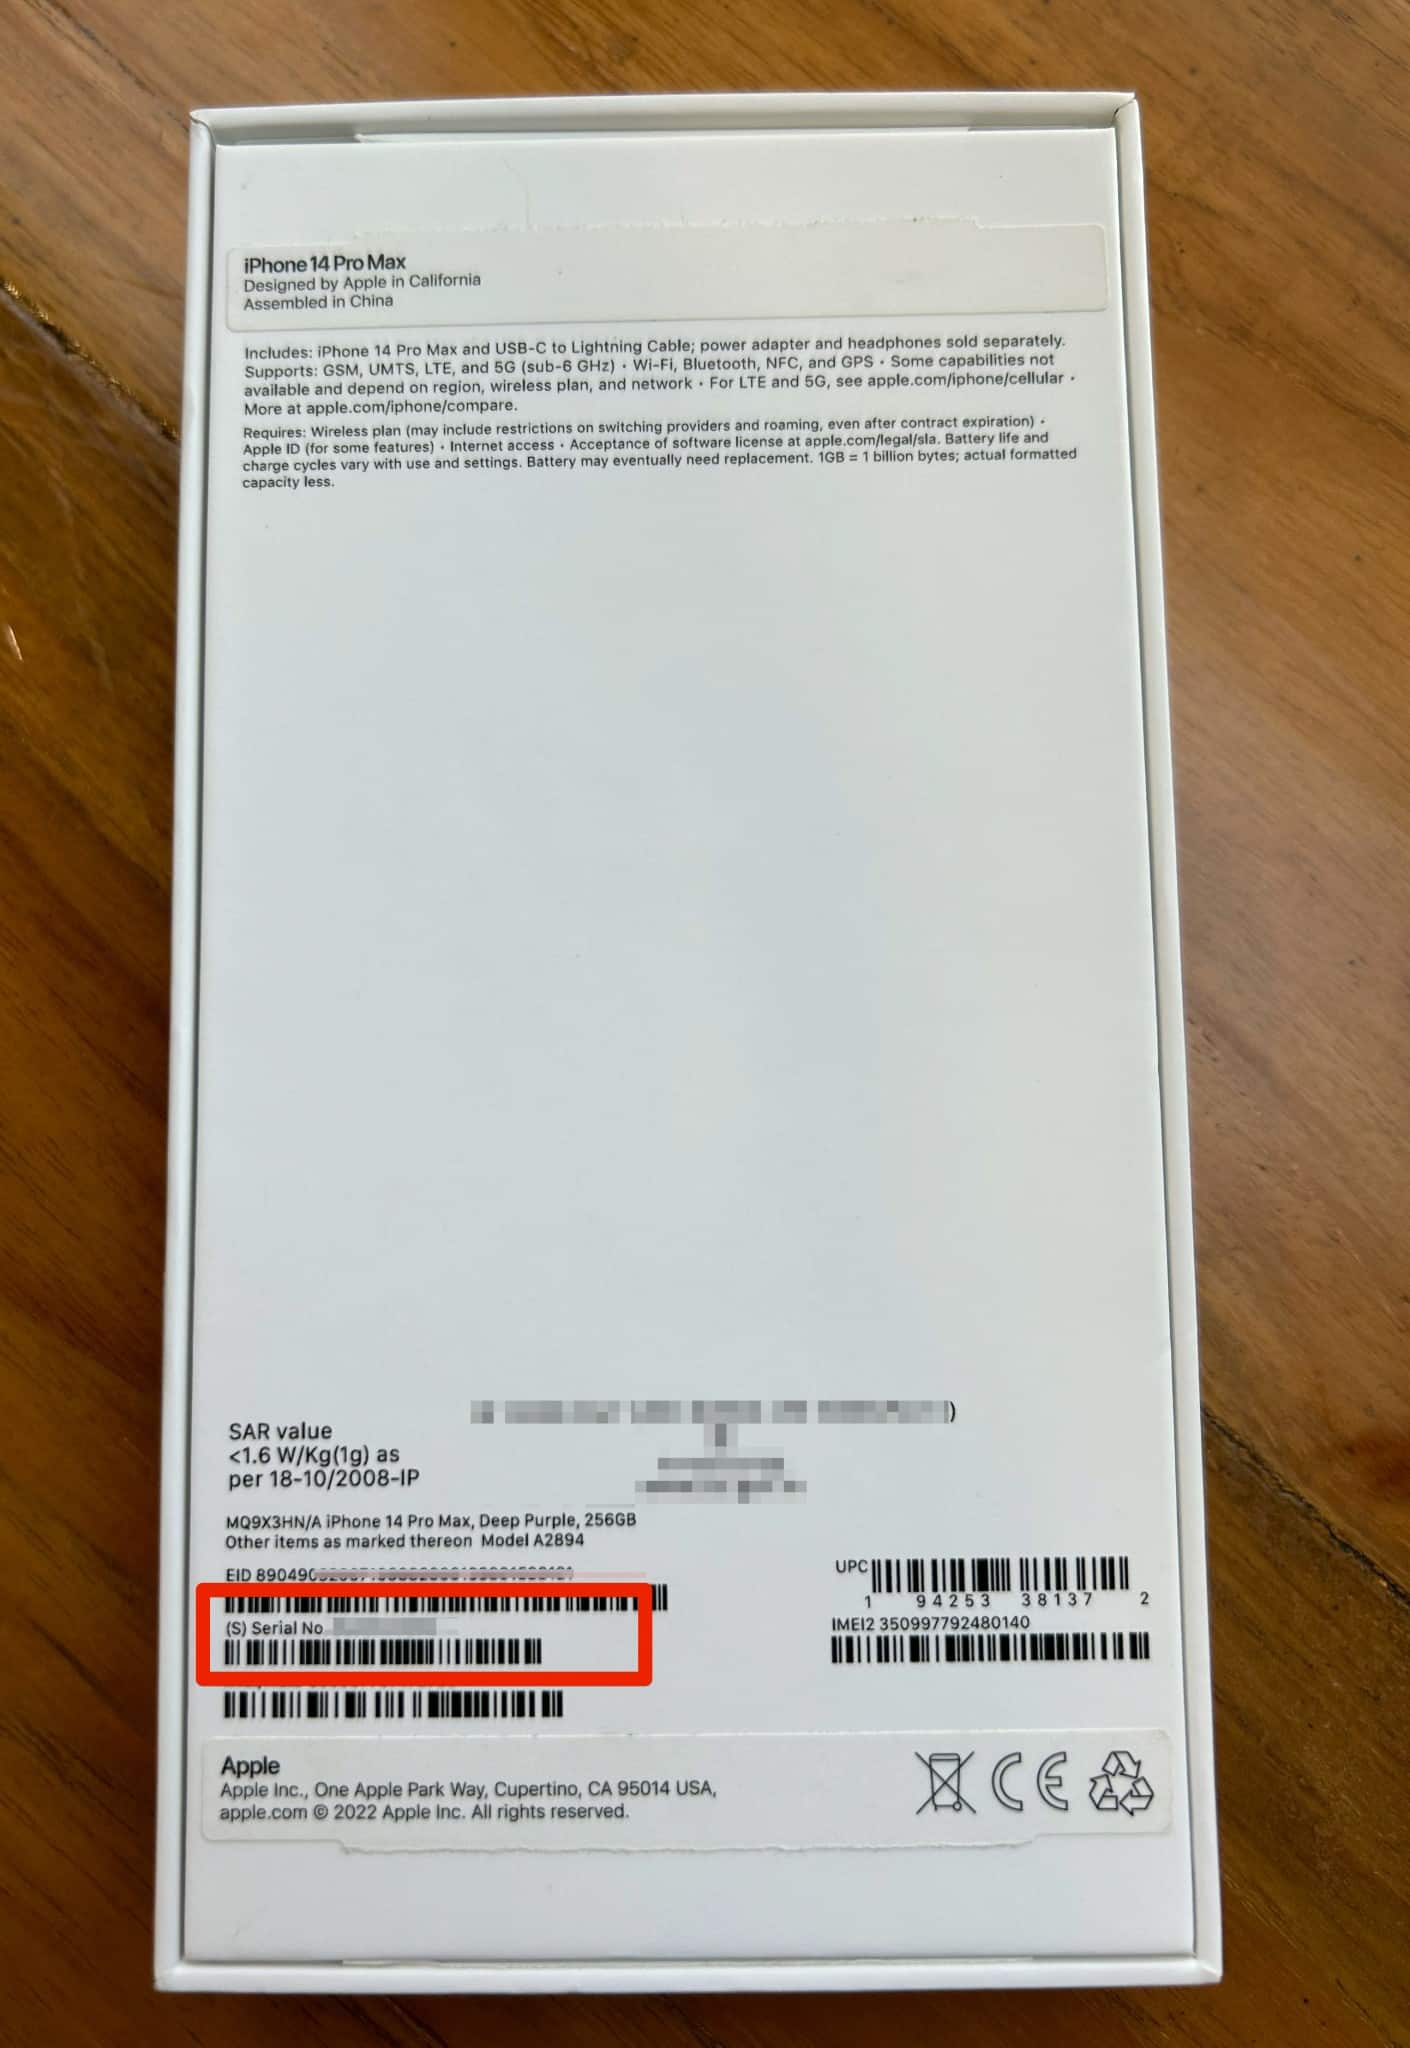 View serial number on iPhone buying box